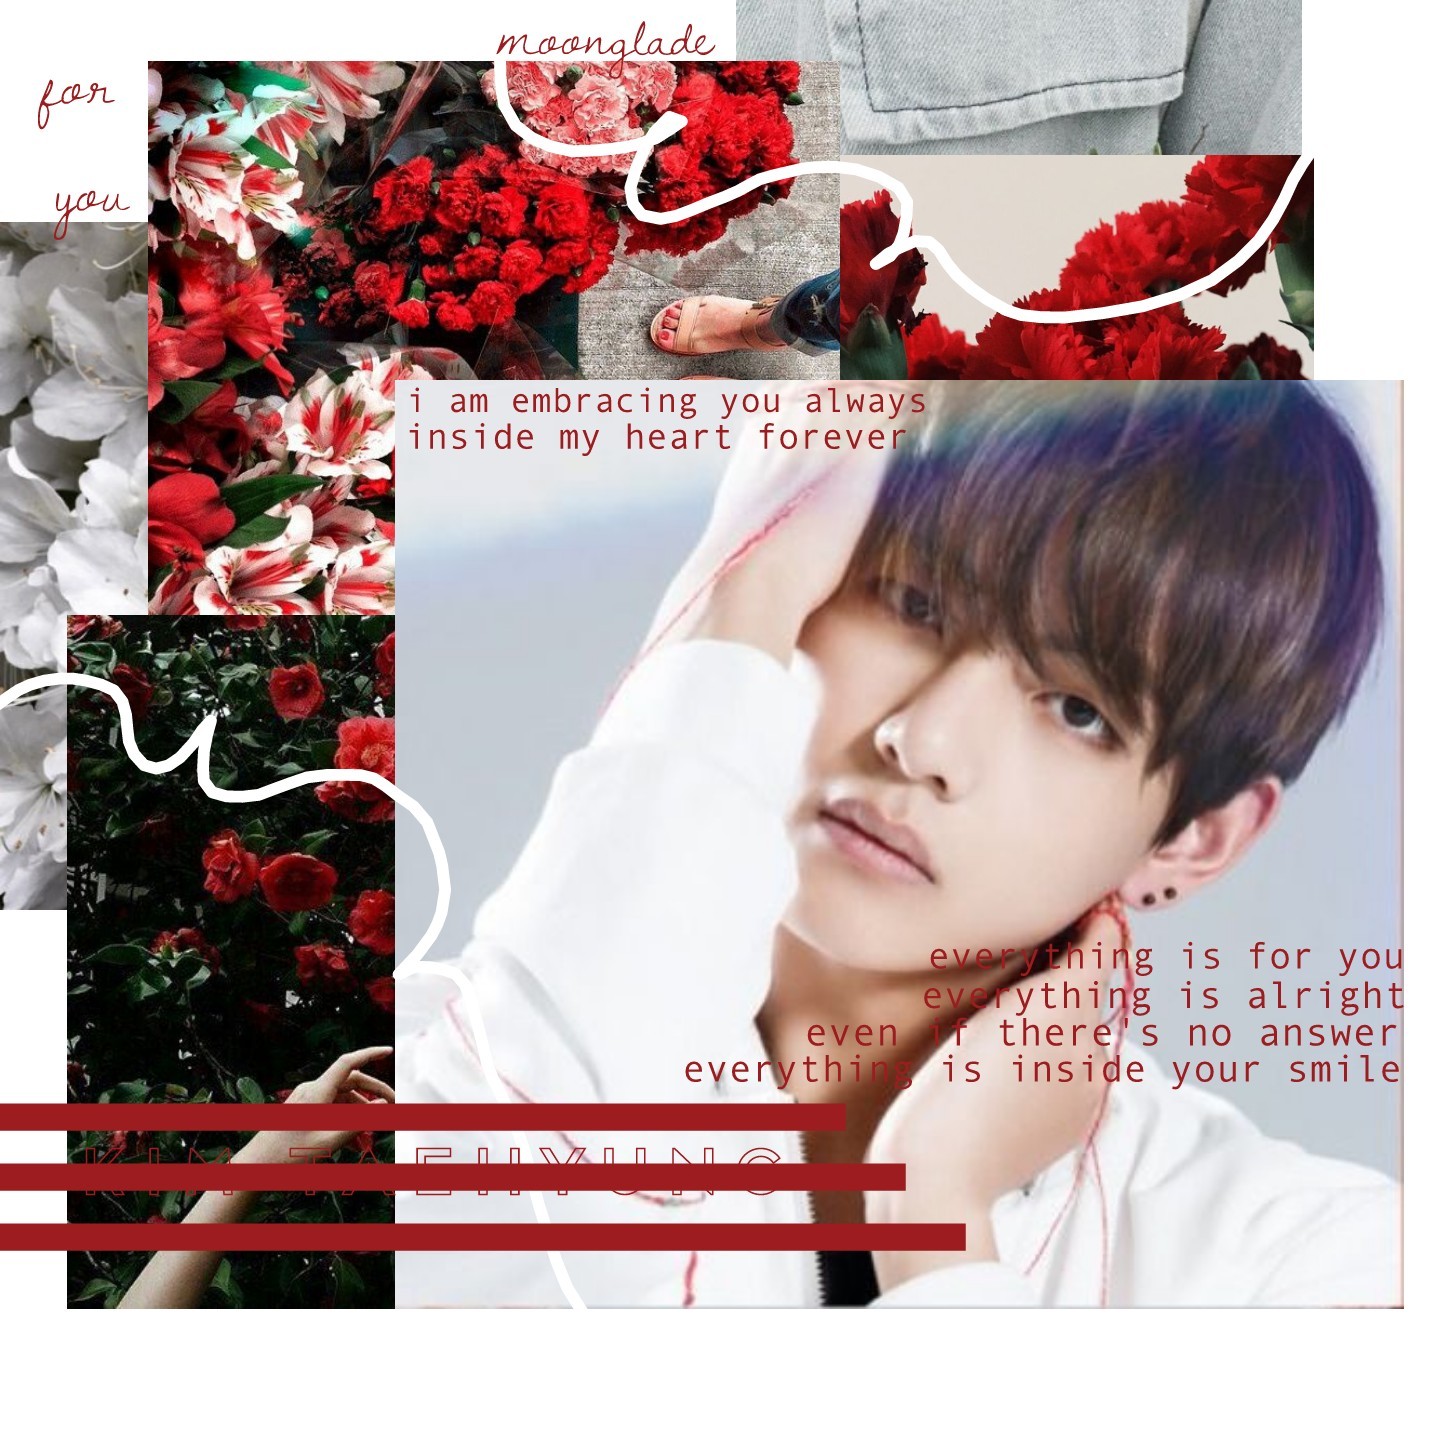 🍁tap🍁

oof
this is trash but
taehyung sure isn't😉😉😍😍
💫💫
anyway have you listened to 'for you' yet?? did you even know that the album 'youth' cane out?? I DIDNT and it came out before Love Yourself Tear did! AHA I'm so behiinndddddd hey when you're sad go 